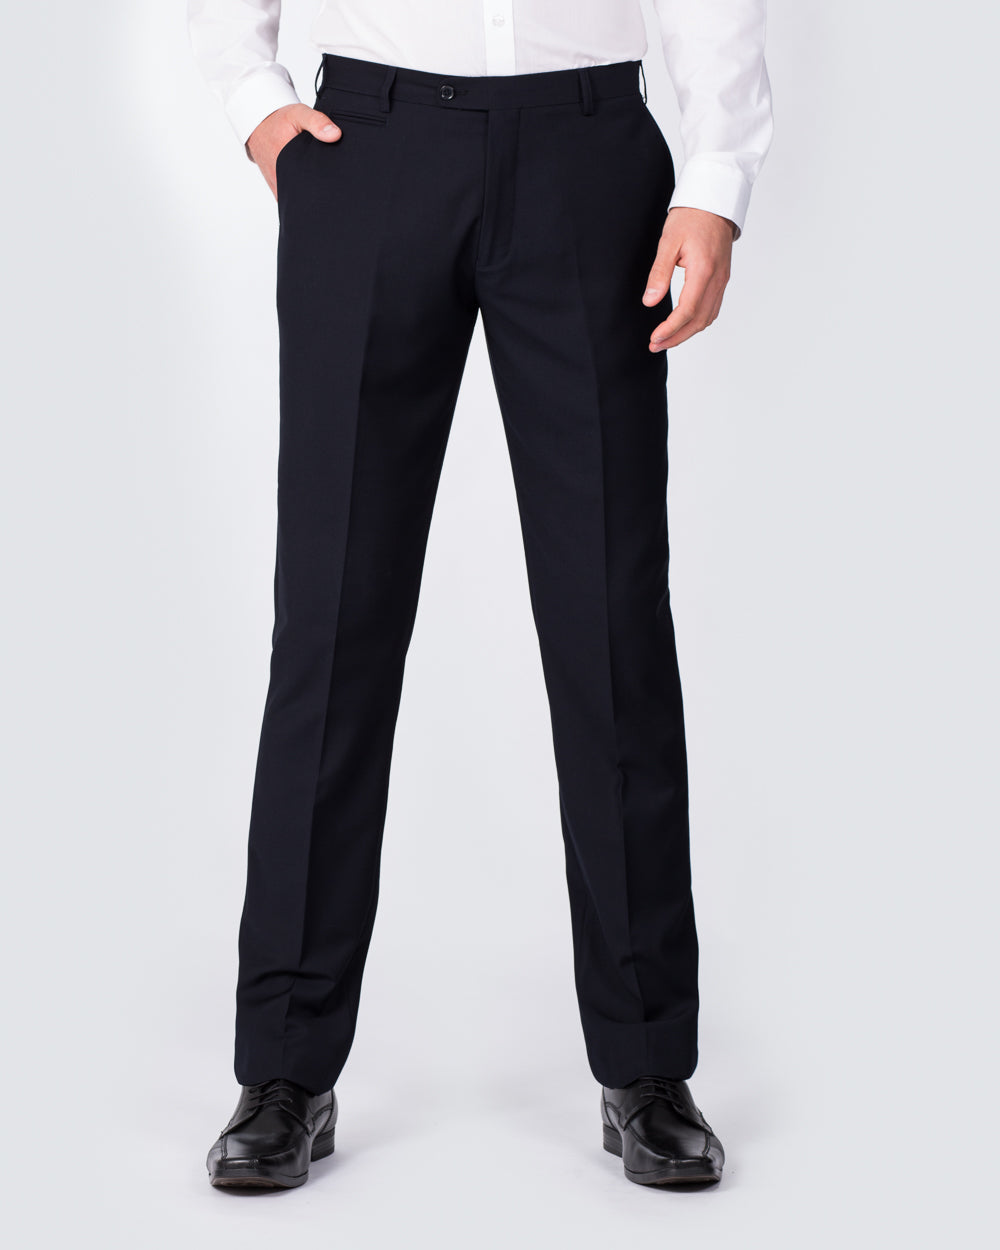 Skopes Slim Fit Tall Suit (navy)